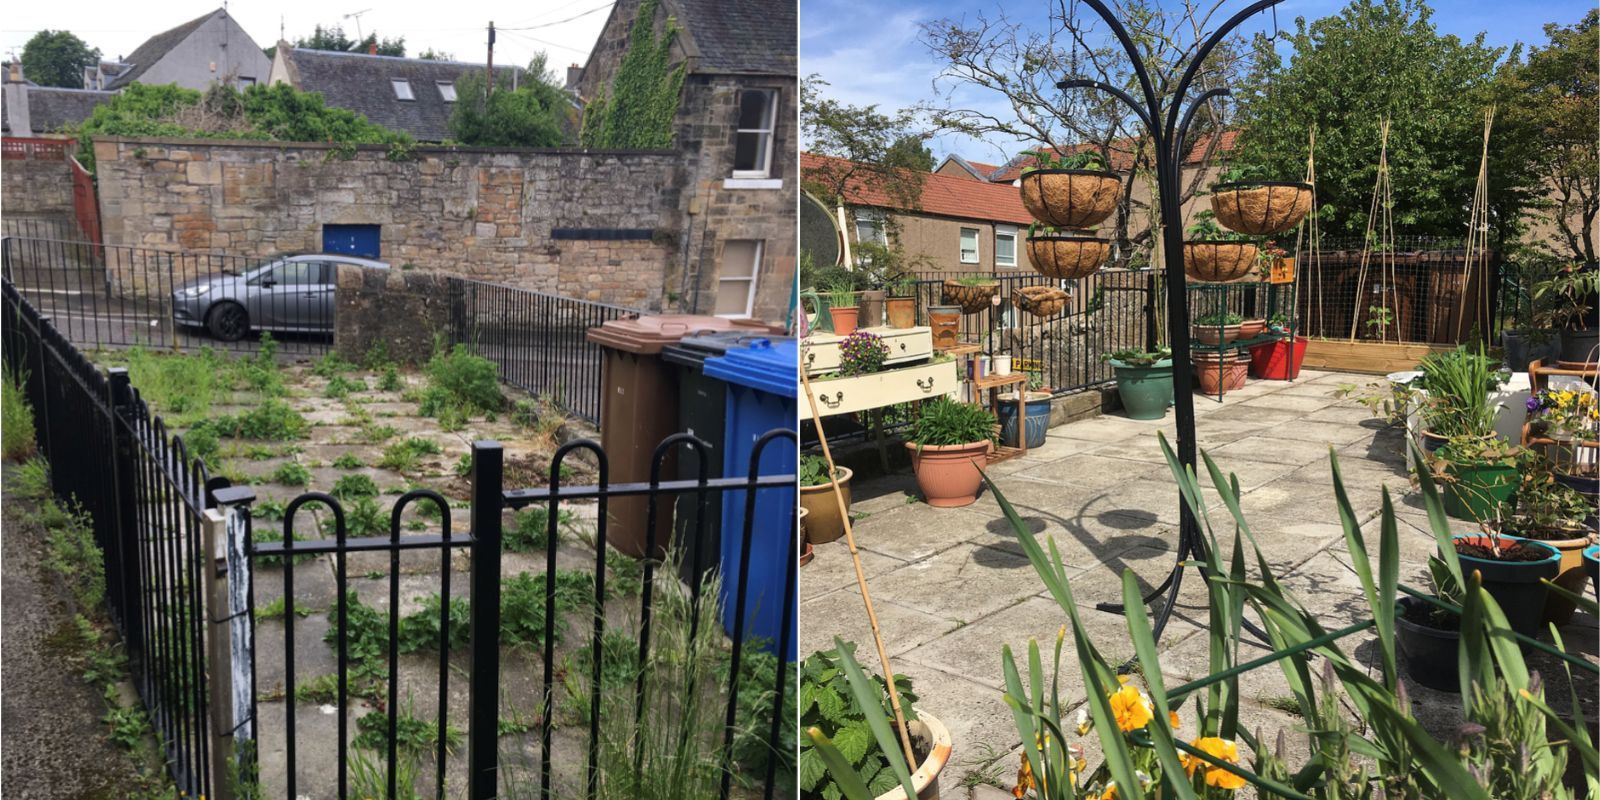 On the left hand side is an enclosed area of patio next to a road. Weeds are growing in the cracks and the space looks unused and unloved. On the right is the same space, but it's now filled with colourful planters and upcylced items. The patio is free of weeds and it's a pleasant space to look at.